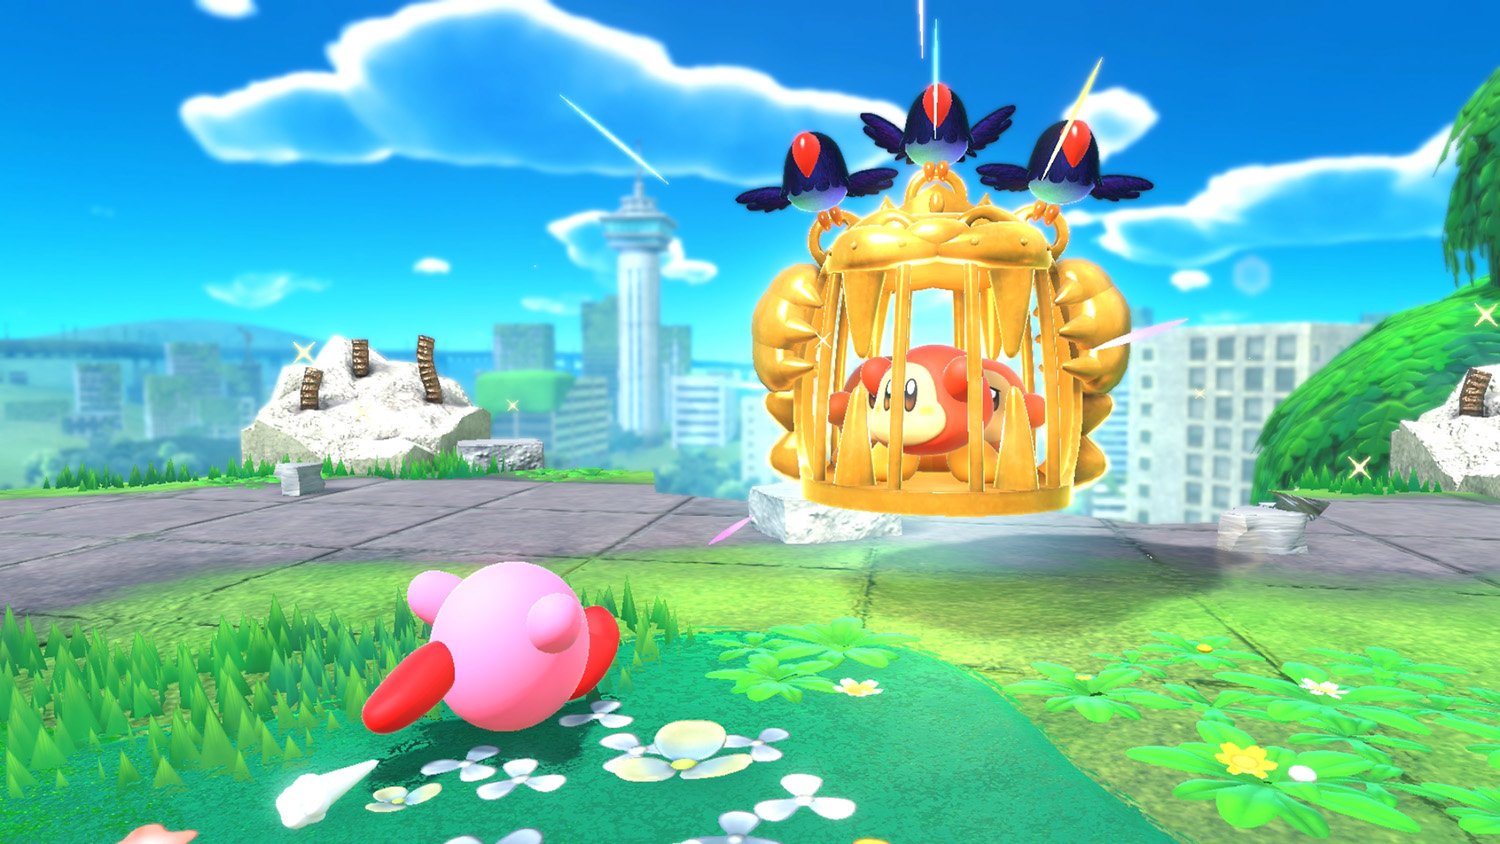 Kirby rescues a Waddle Dee in Kirby and the Forgotten Land, which has received early reviews